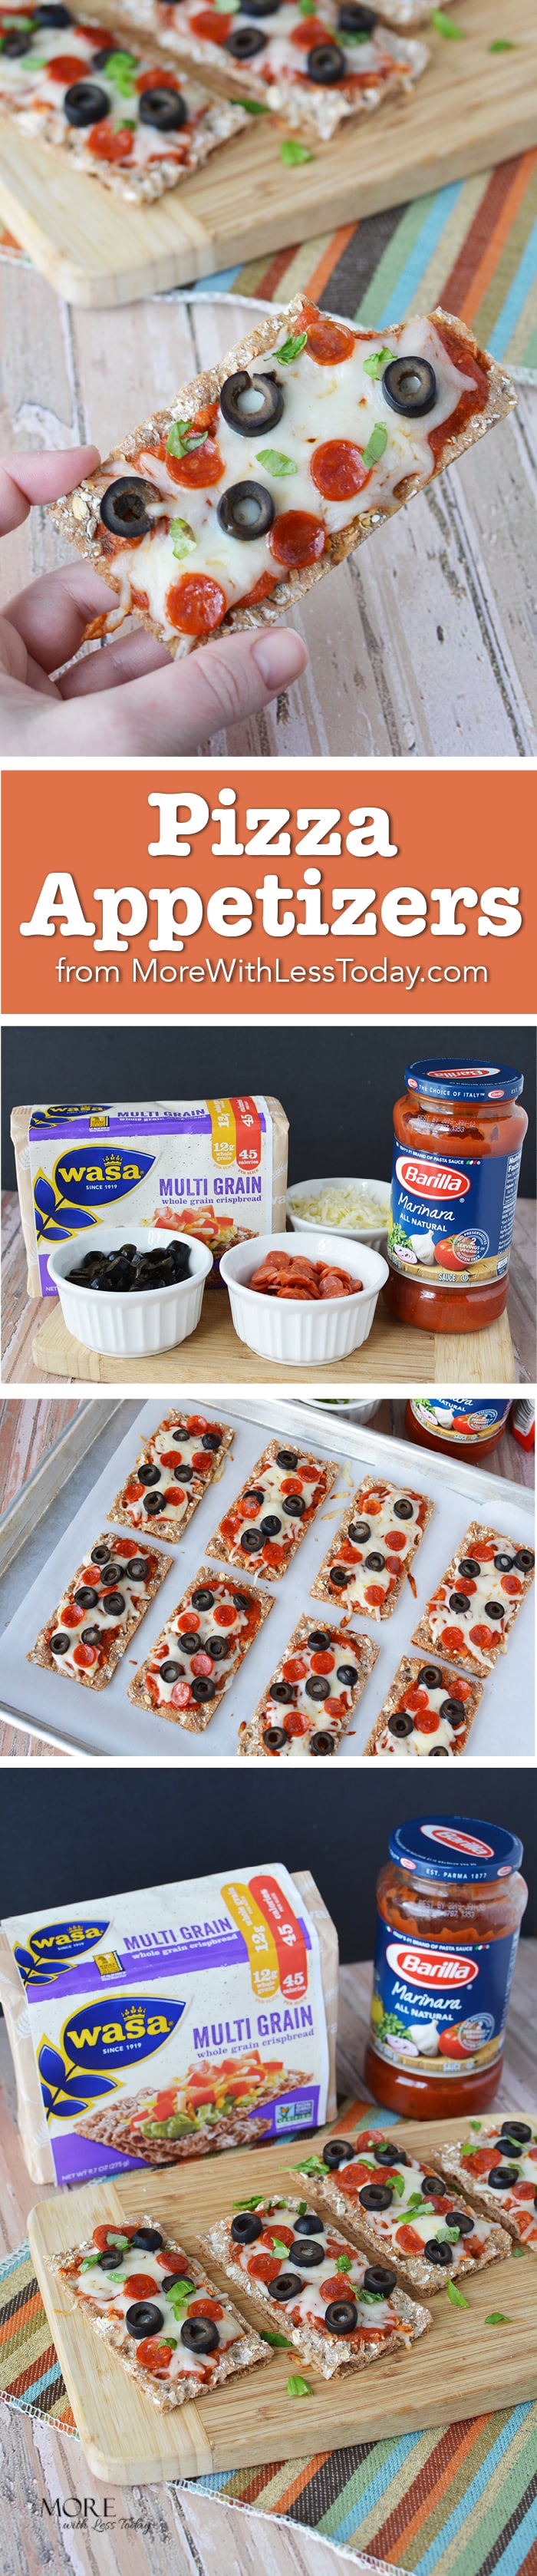 WASA Crispbread Pizza Appetizers- Cooking from Your Pantry